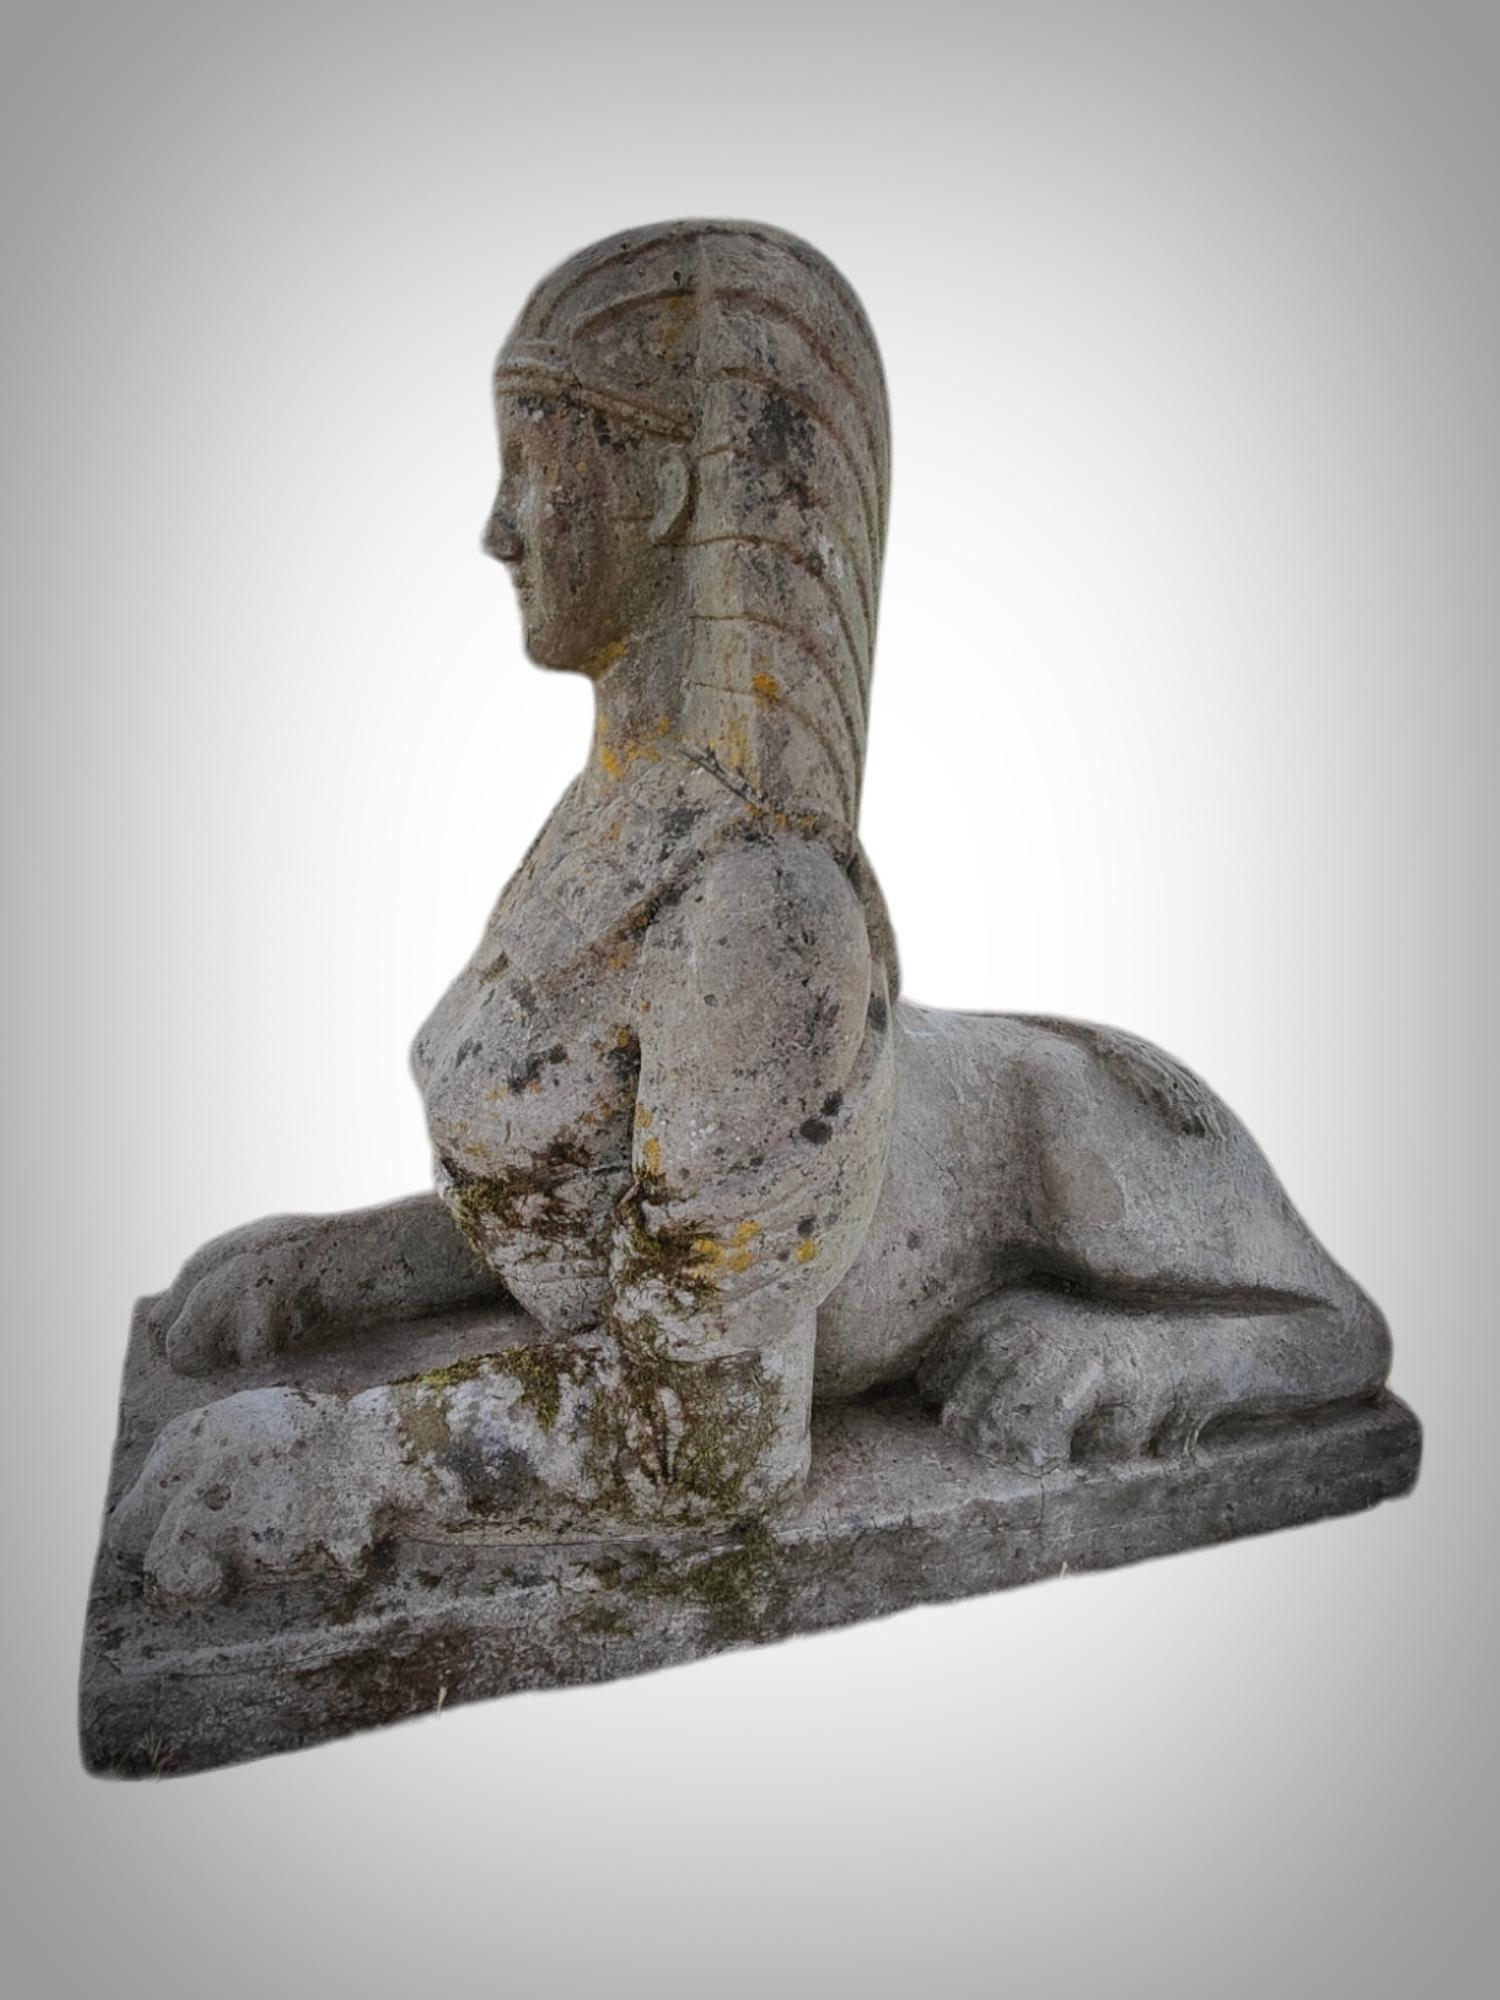 Pair Of Italian Sphinxes From The 20s art deco
Pair of very decorative Italian sphinxes from the early 1920s. In stone or similar. In good general condition. With signs of the pasing of time. Dimensions: 95x41x86cm.